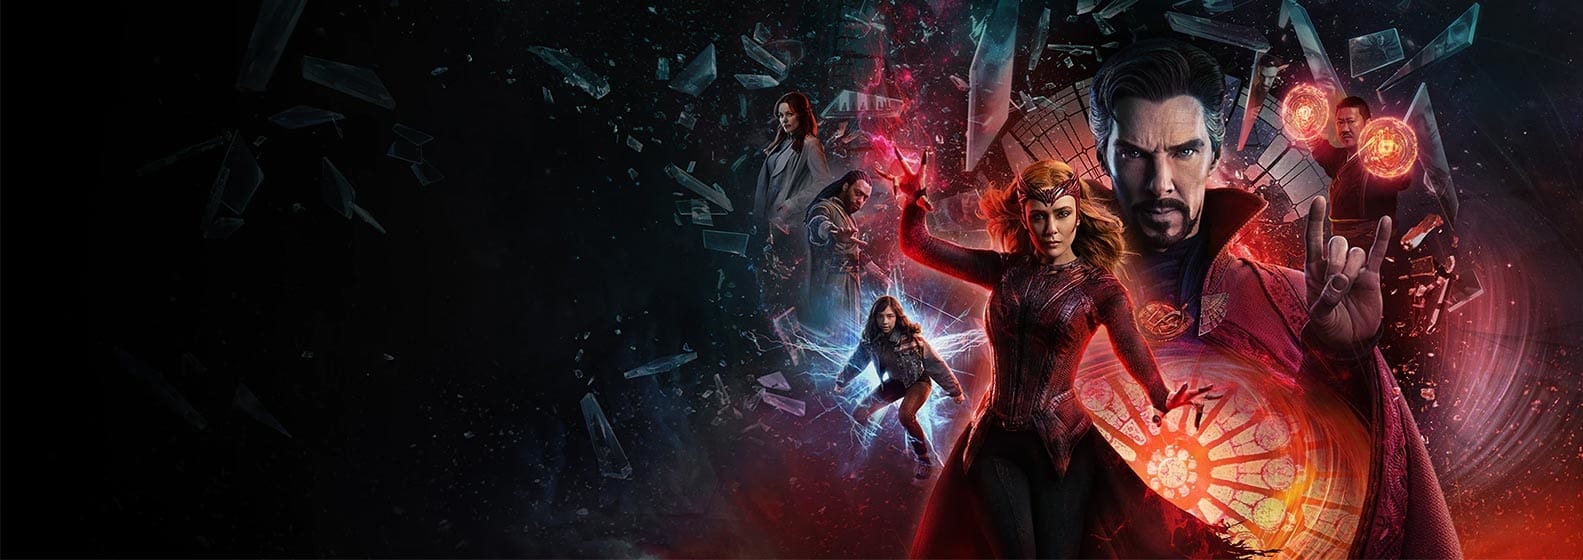 Doctor Strange in the Multiverse of Madness - Header Image